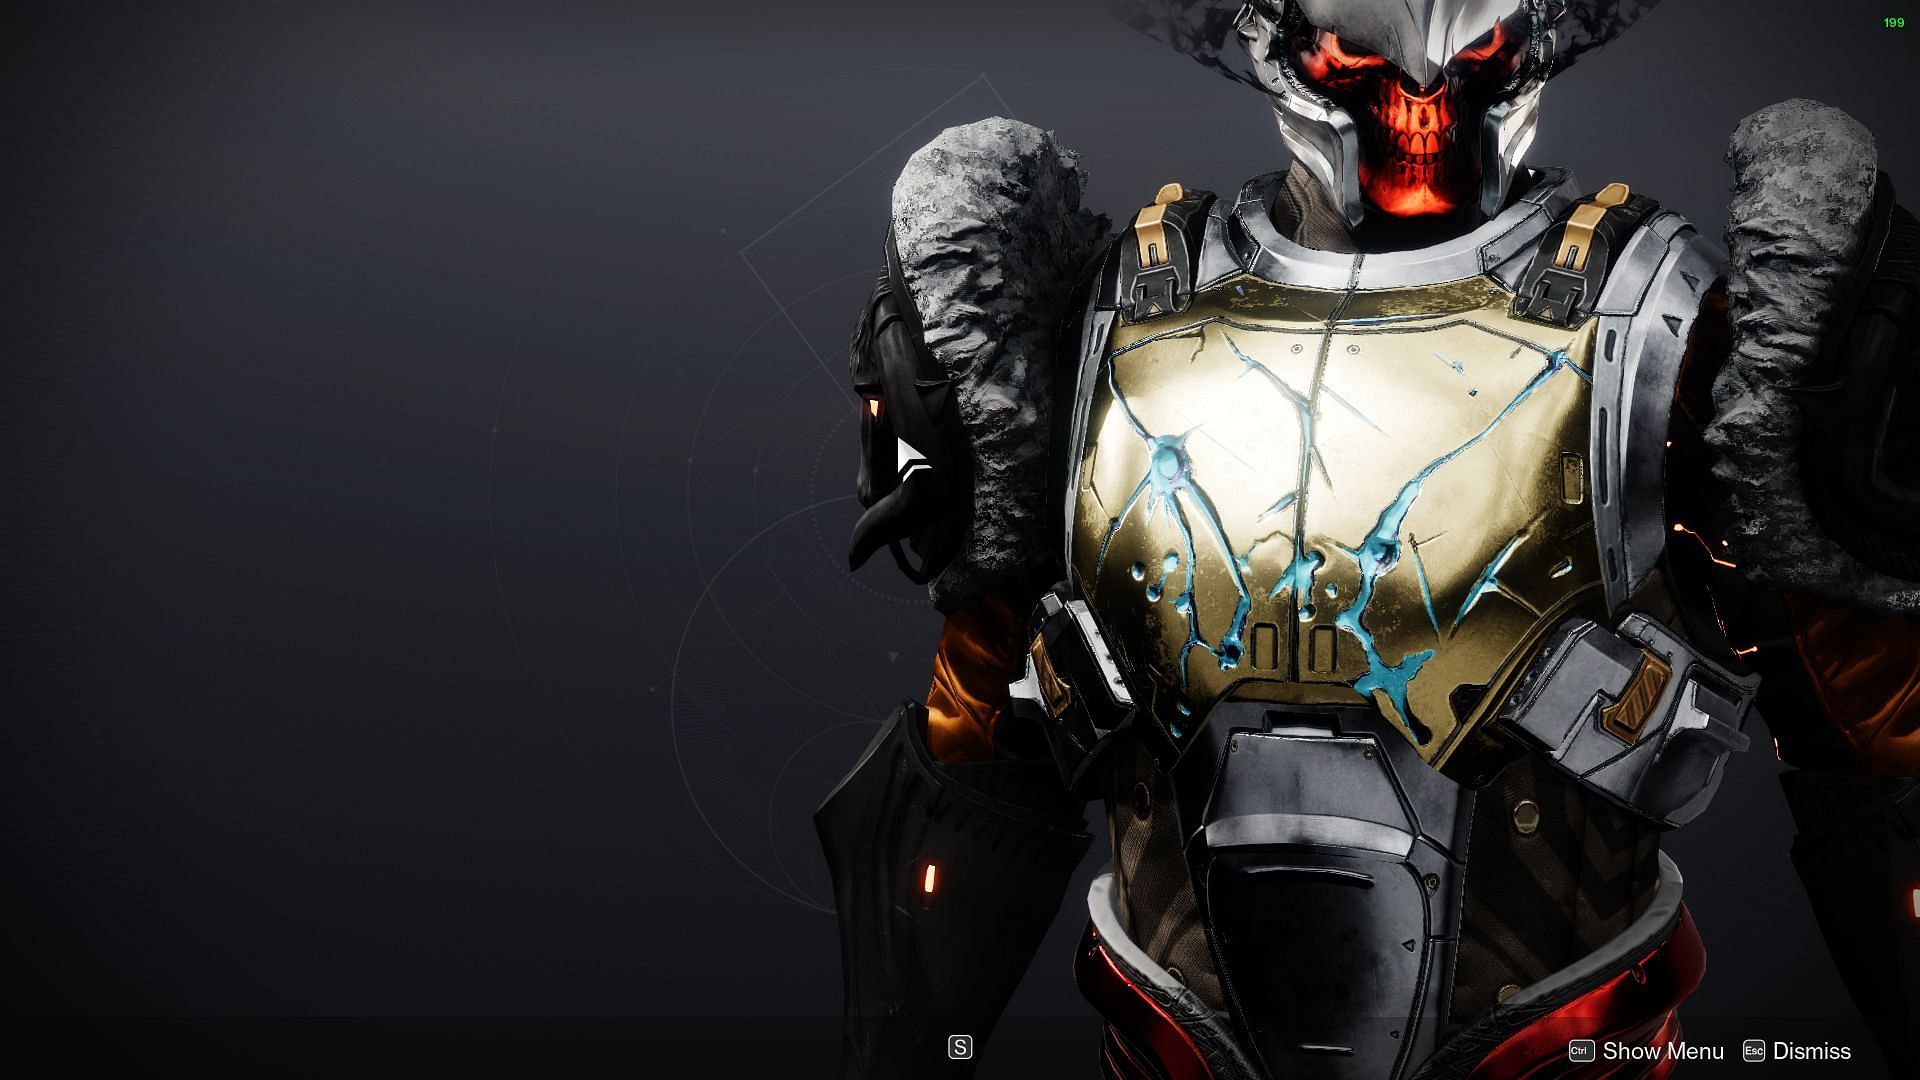 Heart of Inmost Light (Image via Bungie)